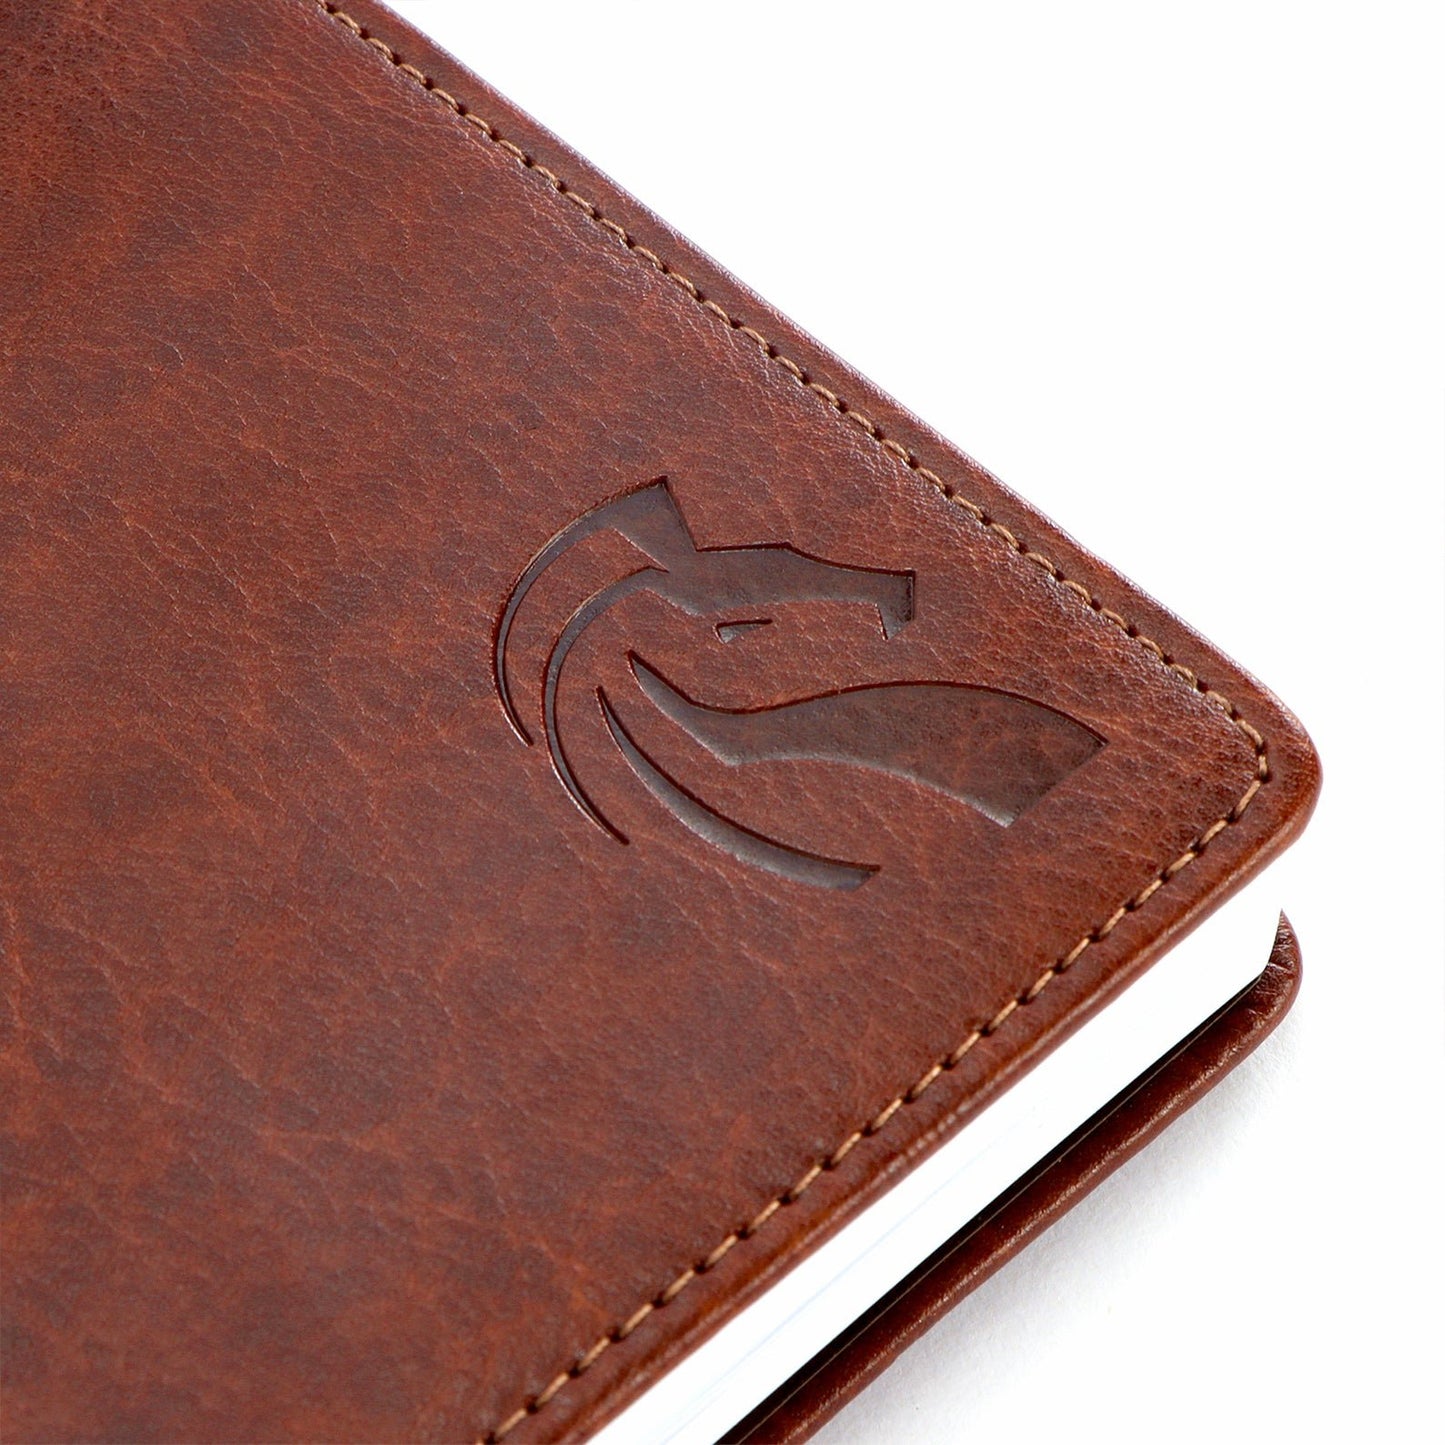 A5 Hardcover Journal Notebook - Brown Faux Leather